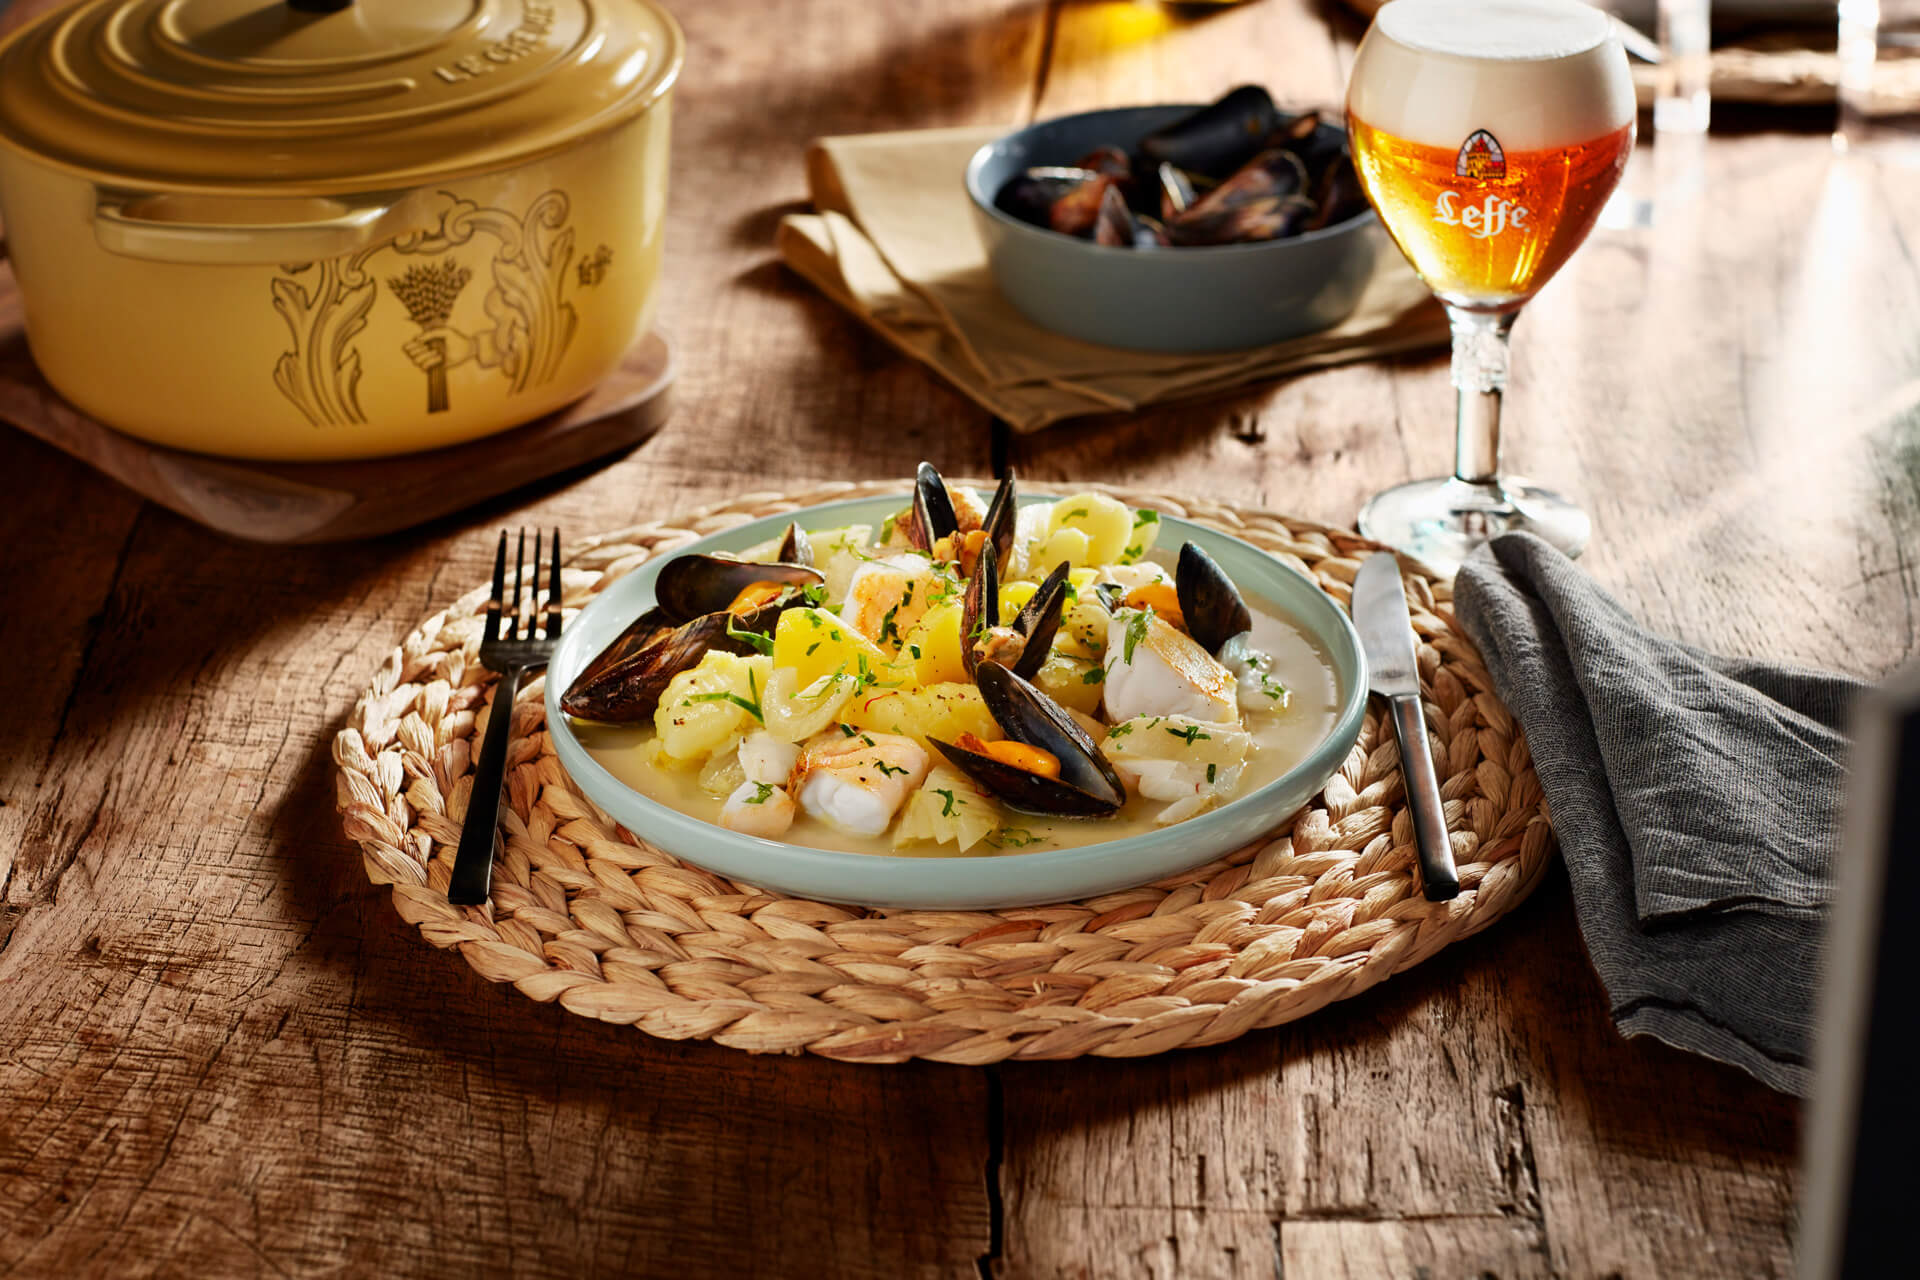 Leffe - food photography by Erik de Koning - mixed seafood and beer